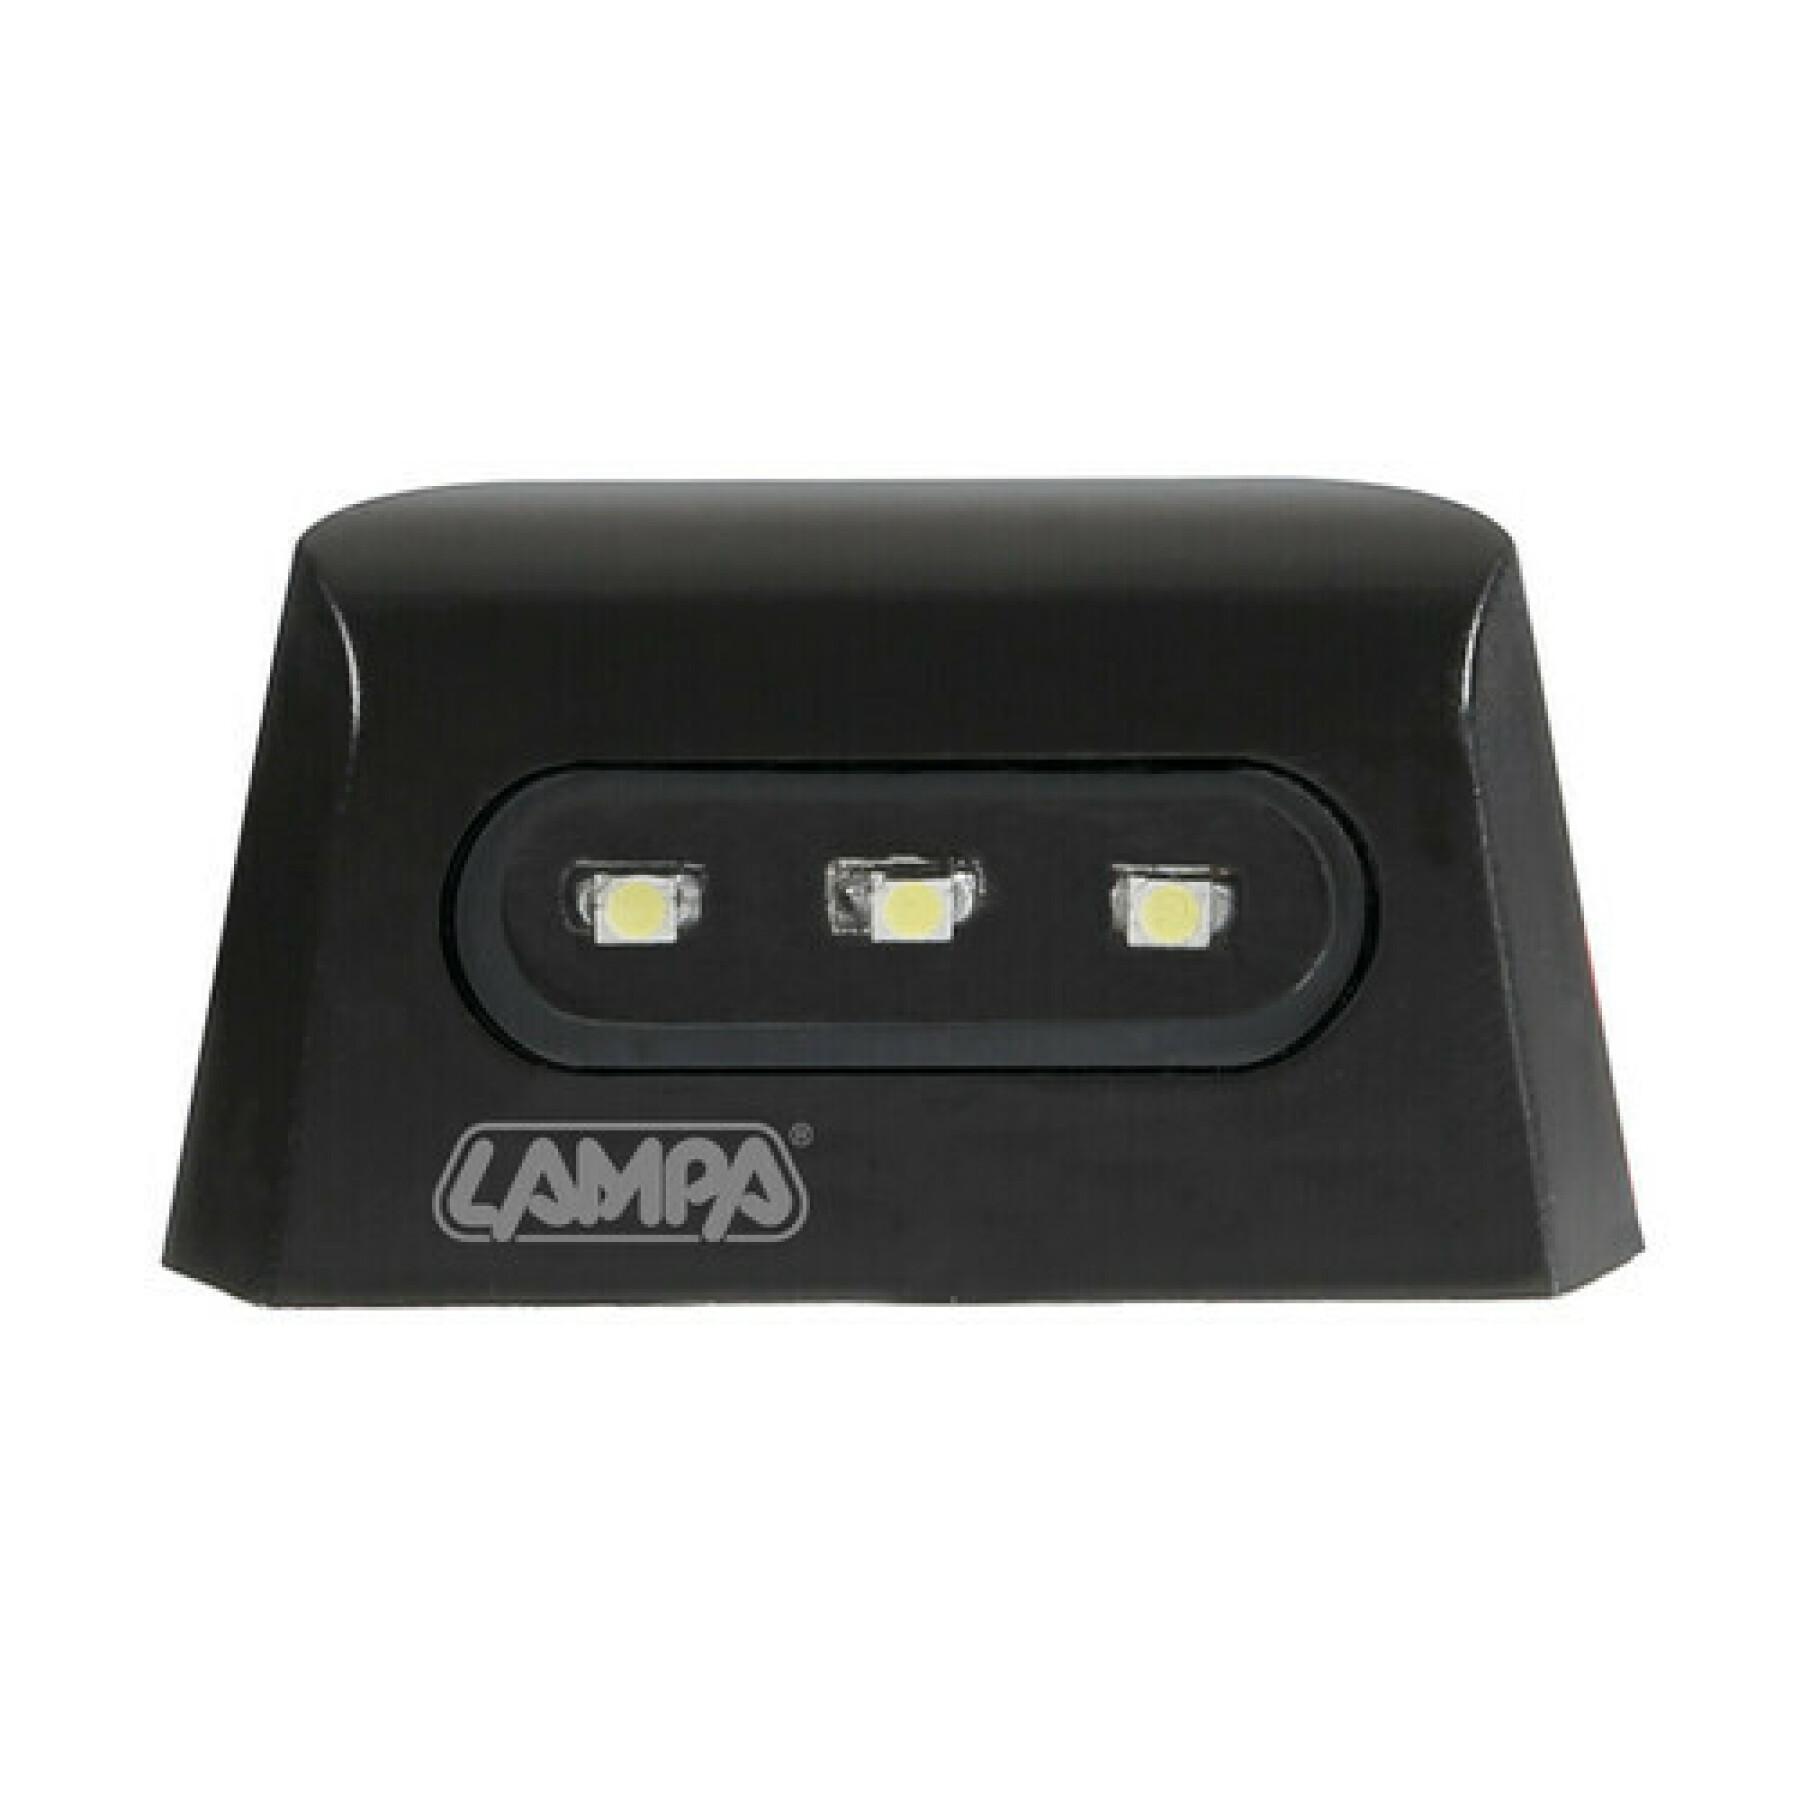 3 led plate lights smd Lampa Aion